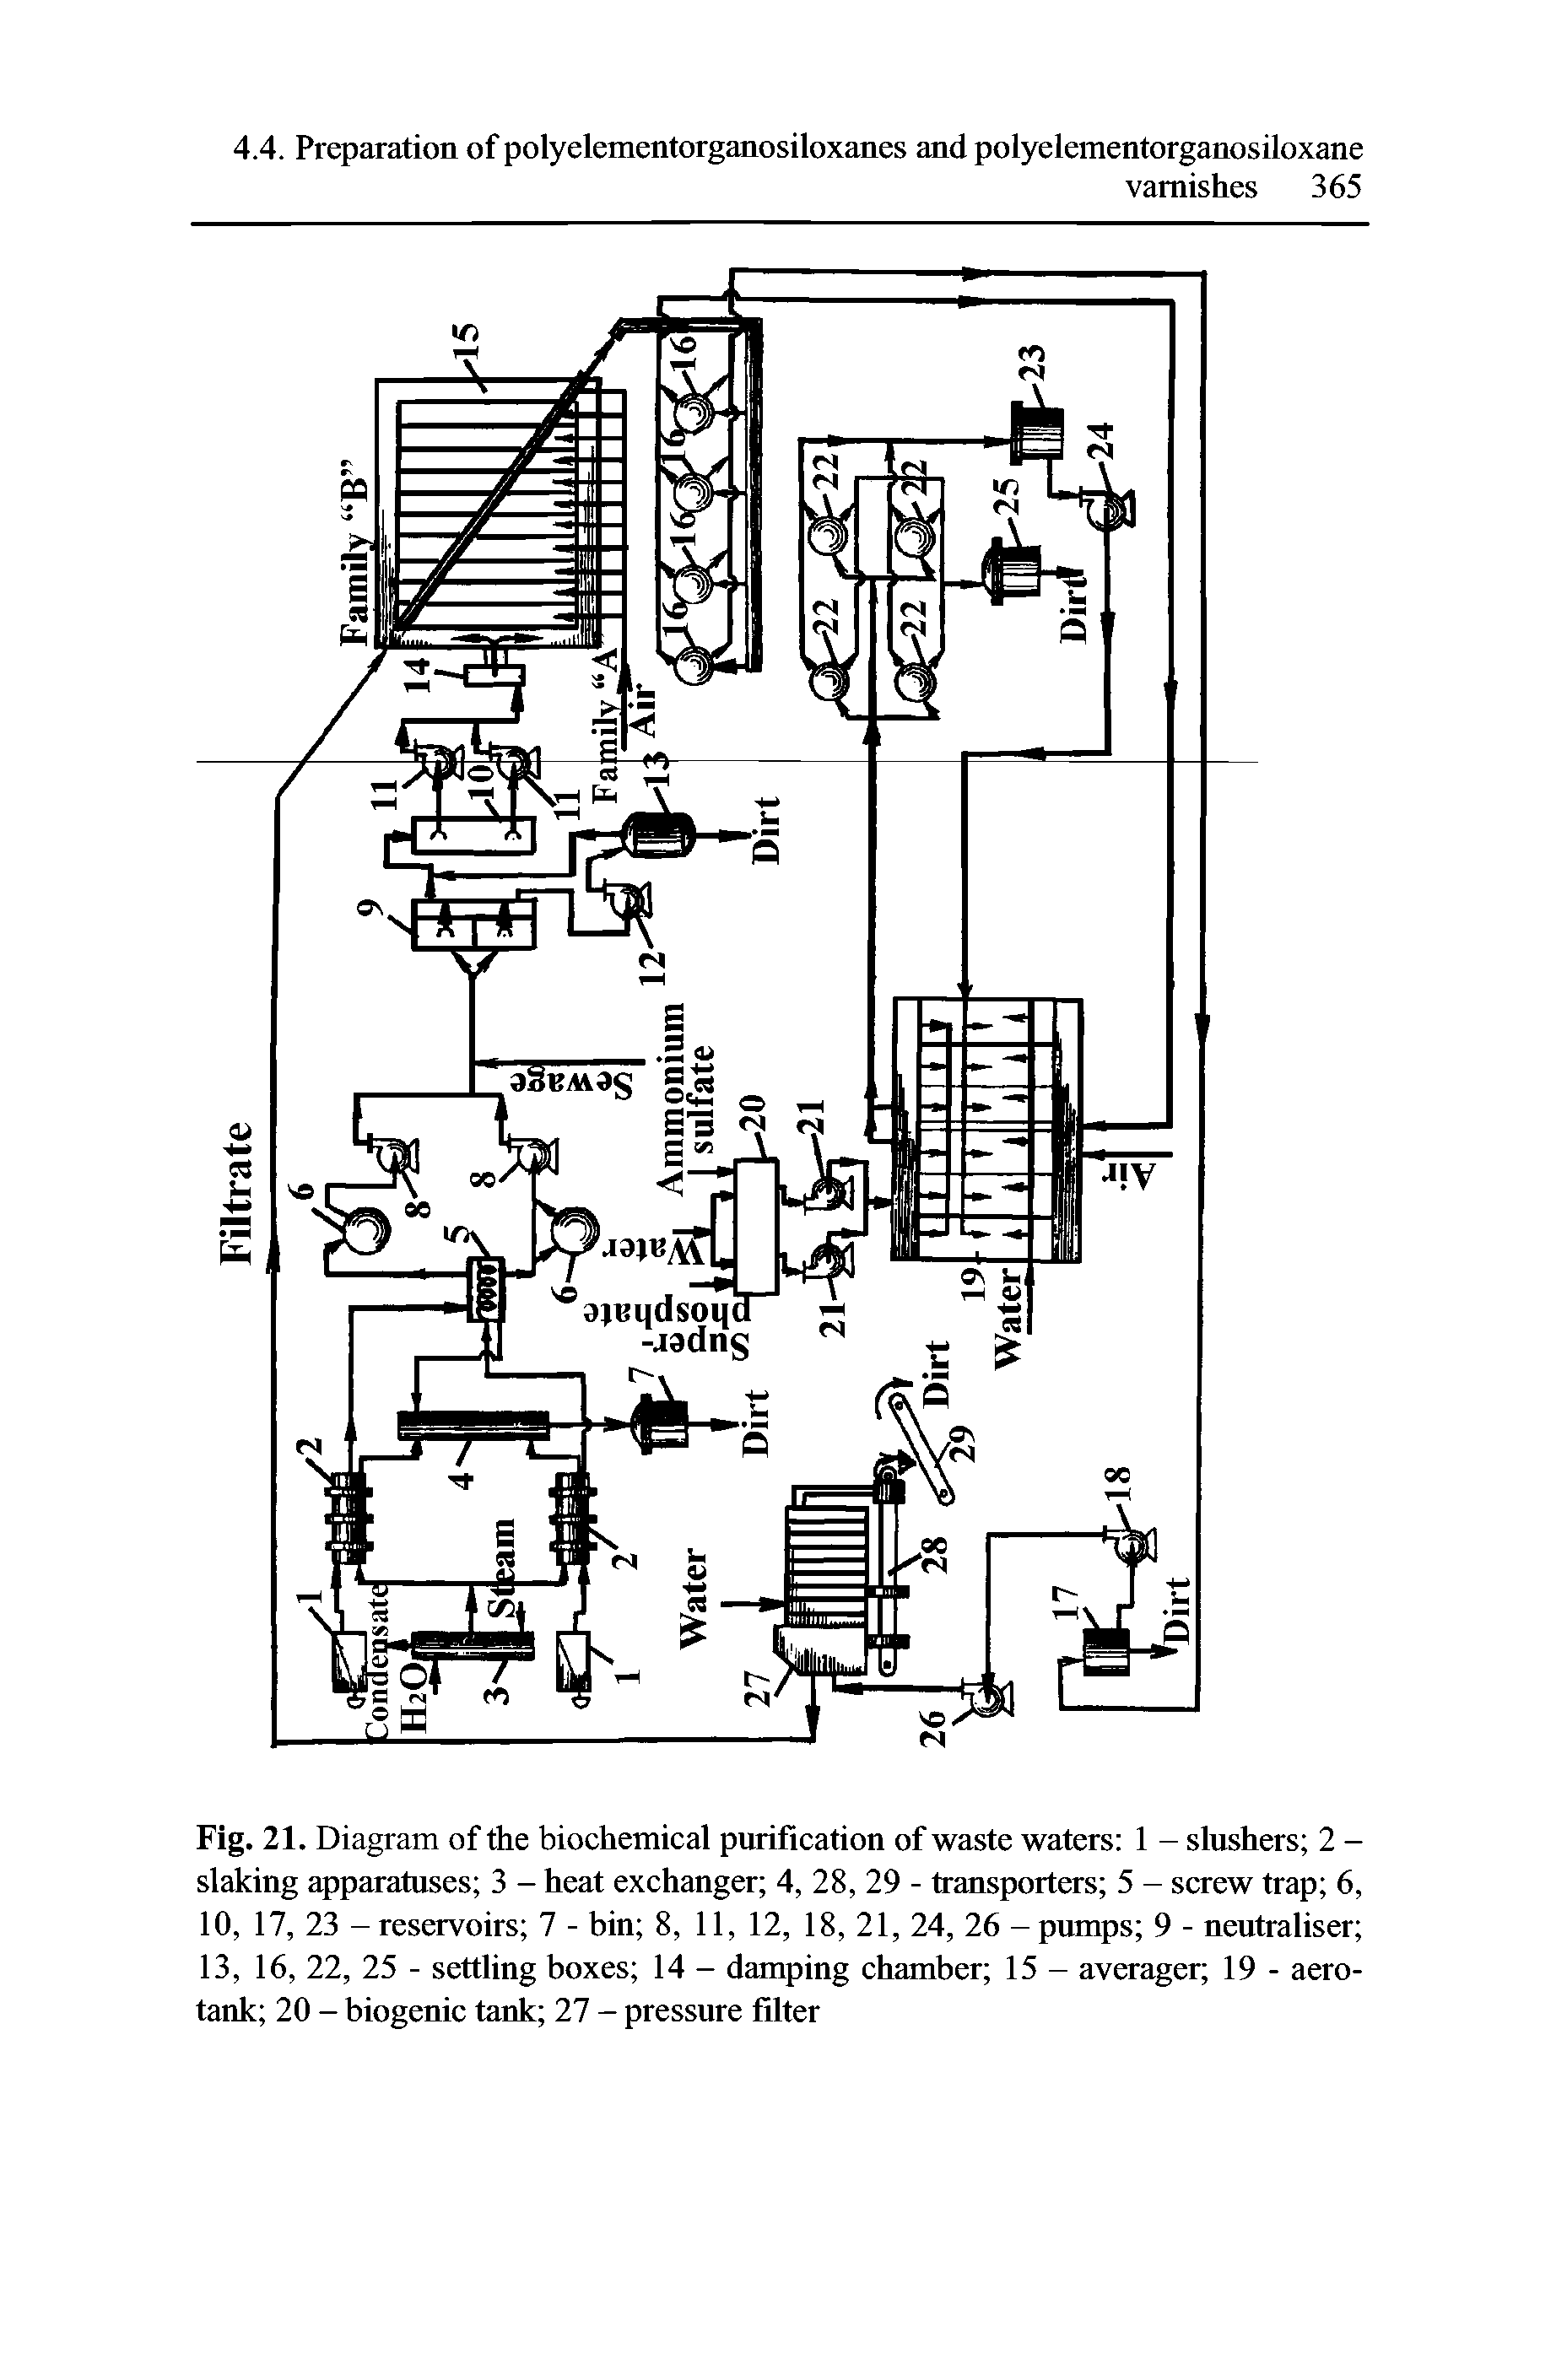 Fig. 21. Diagram of the biochemical purification of waste waters 1 - slushers 2 -slaking apparatuses 3 - heat exchanger 4, 28, 29 - transporters 5 - screw trap 6, 10, 17, 23 - reservoirs 7 - bin 8, 11, 12, 18, 21, 24, 26 - pumps 9 - neutraliser 13, 16, 22, 25 - settling boxes 14 - damping chamber 15 - averager 19 - aero-tank 20 - biogenic tank 27 - pressure filter...